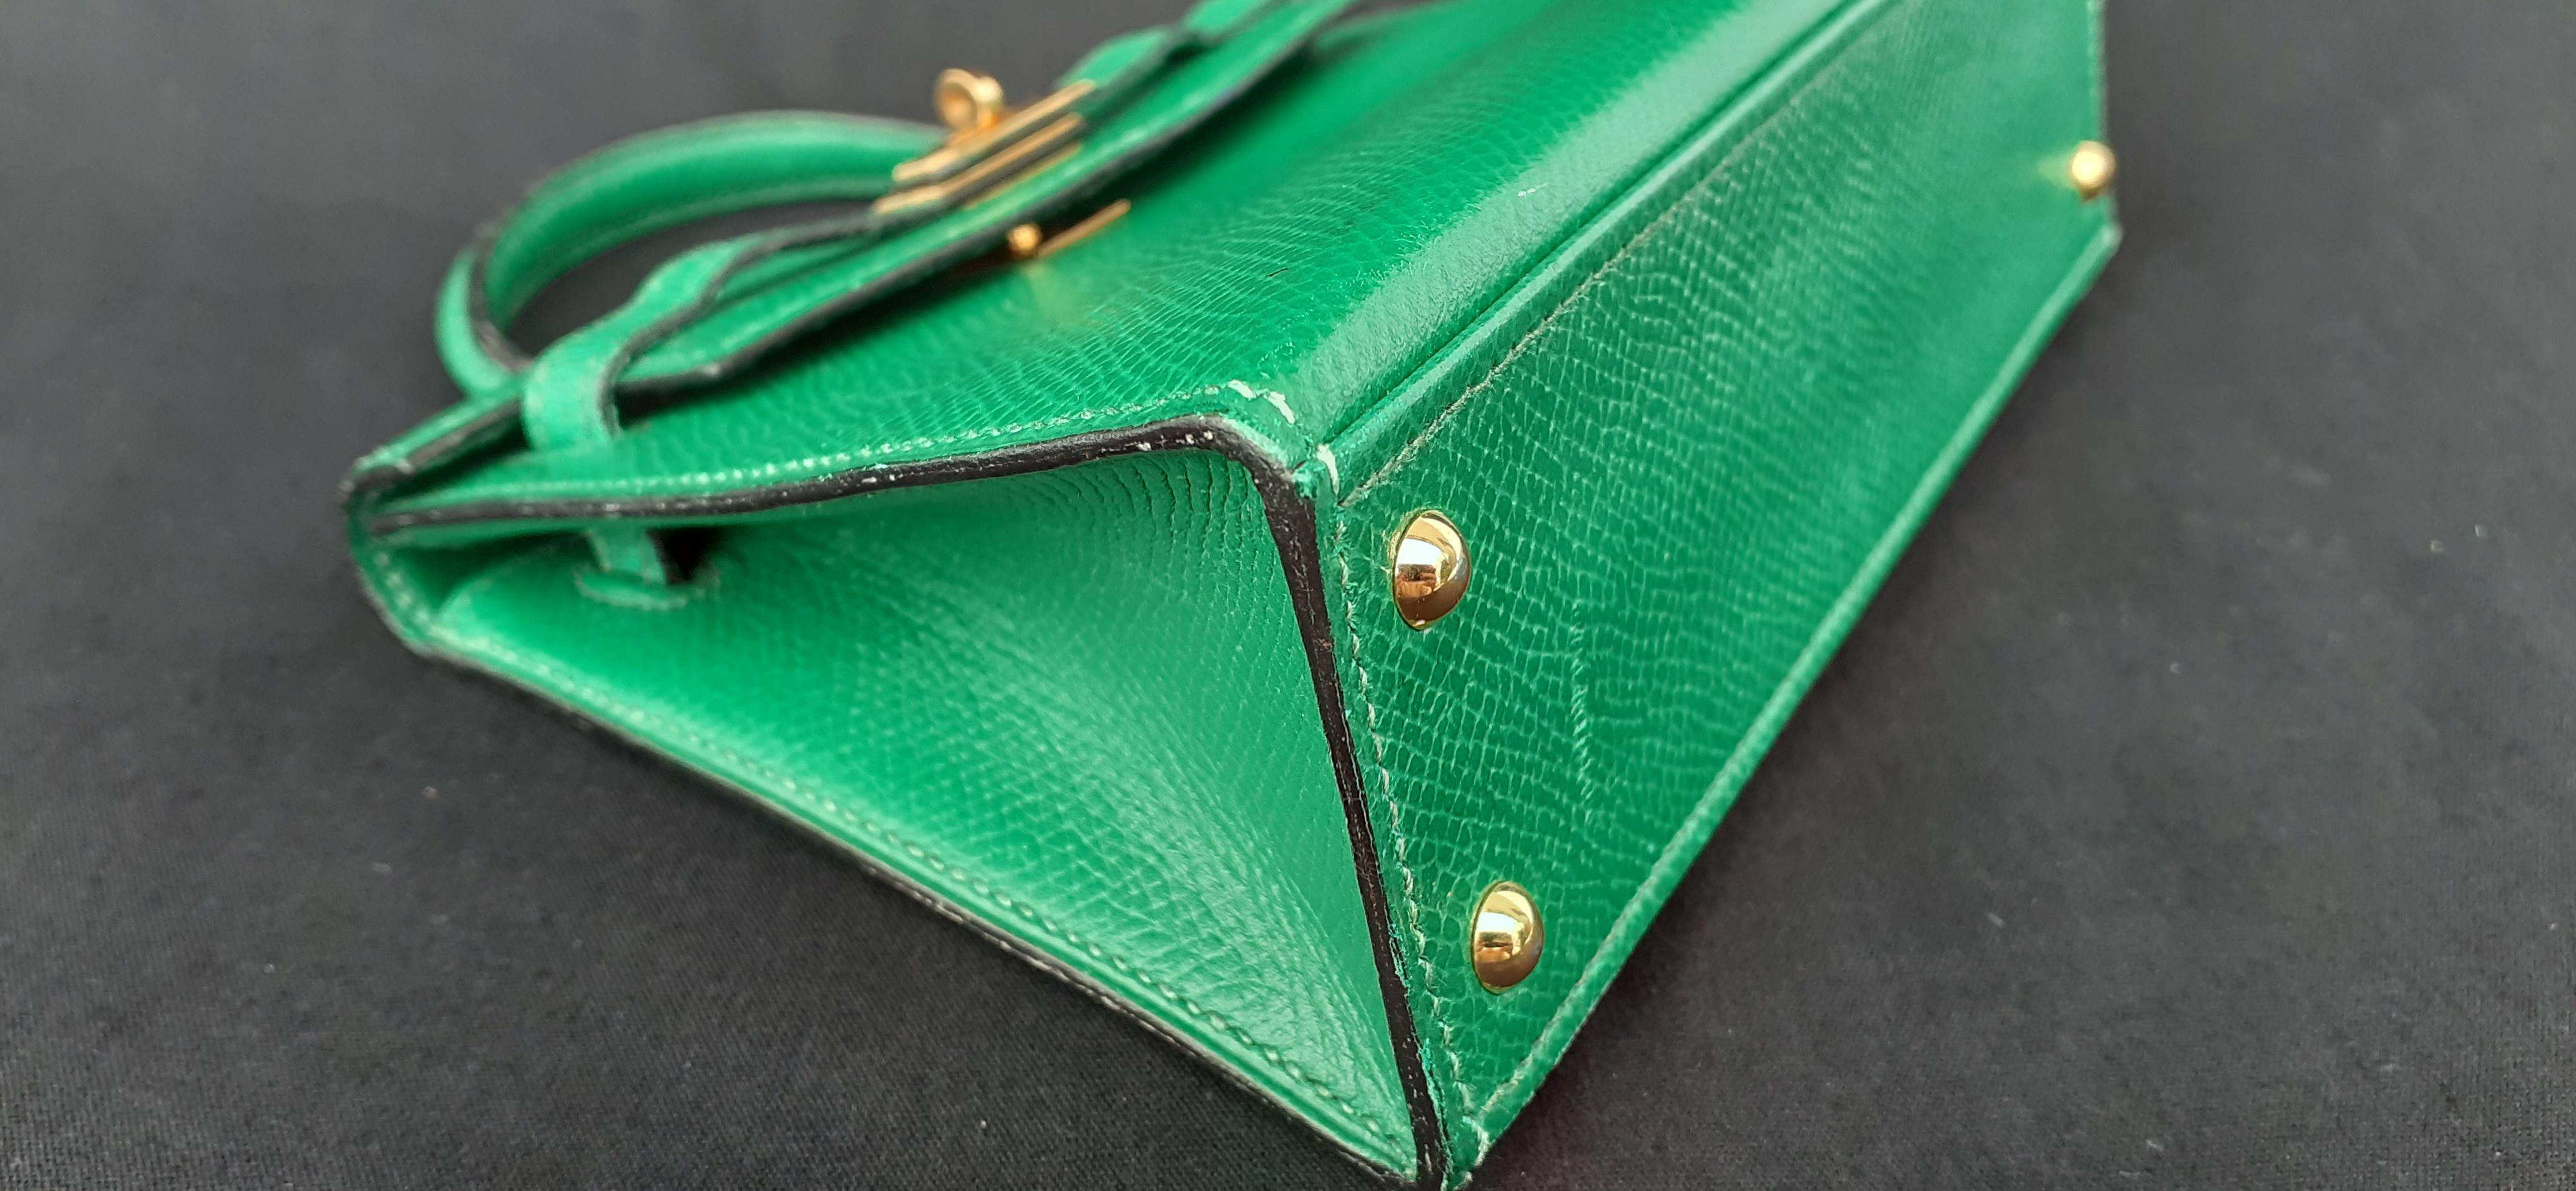 Exceptional Hermès Vintage Micro Kelly 15 cm Sellier Bag Green Leather Gold Hdw 3